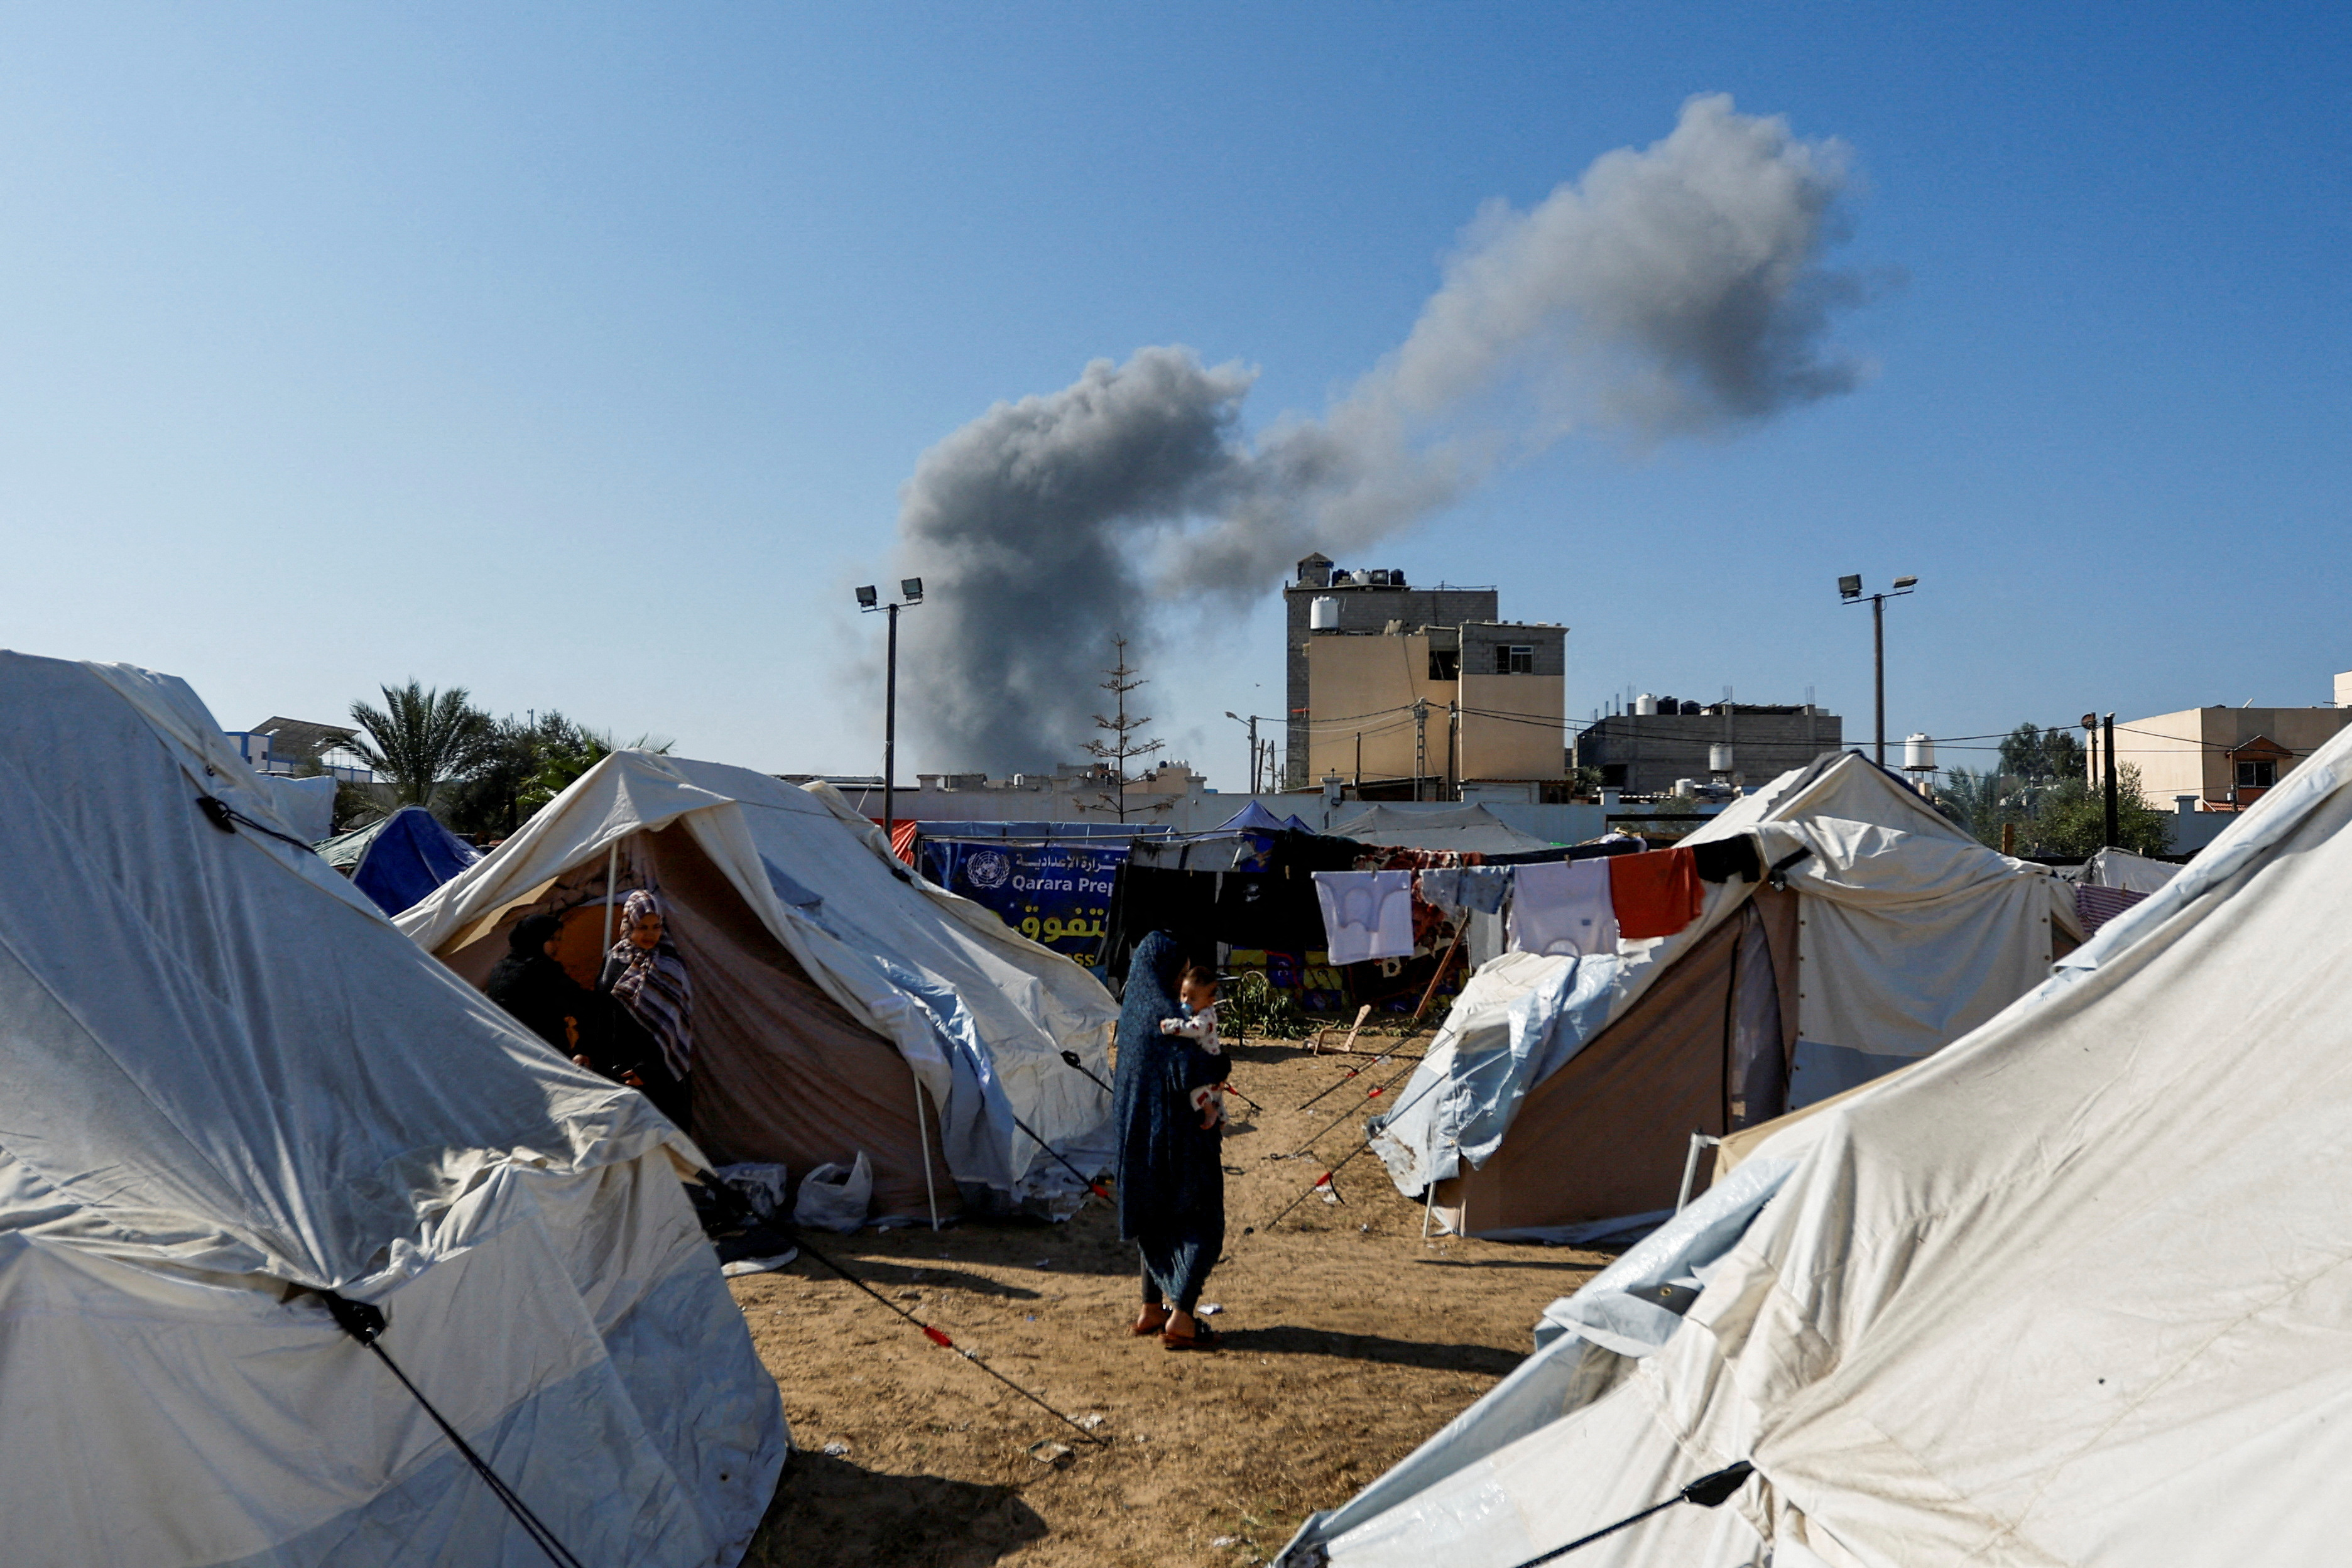 Smoke rises from nearby Israeli strikes as seen from a tent camp sheltering displaced Palestinians, in Khan Younis